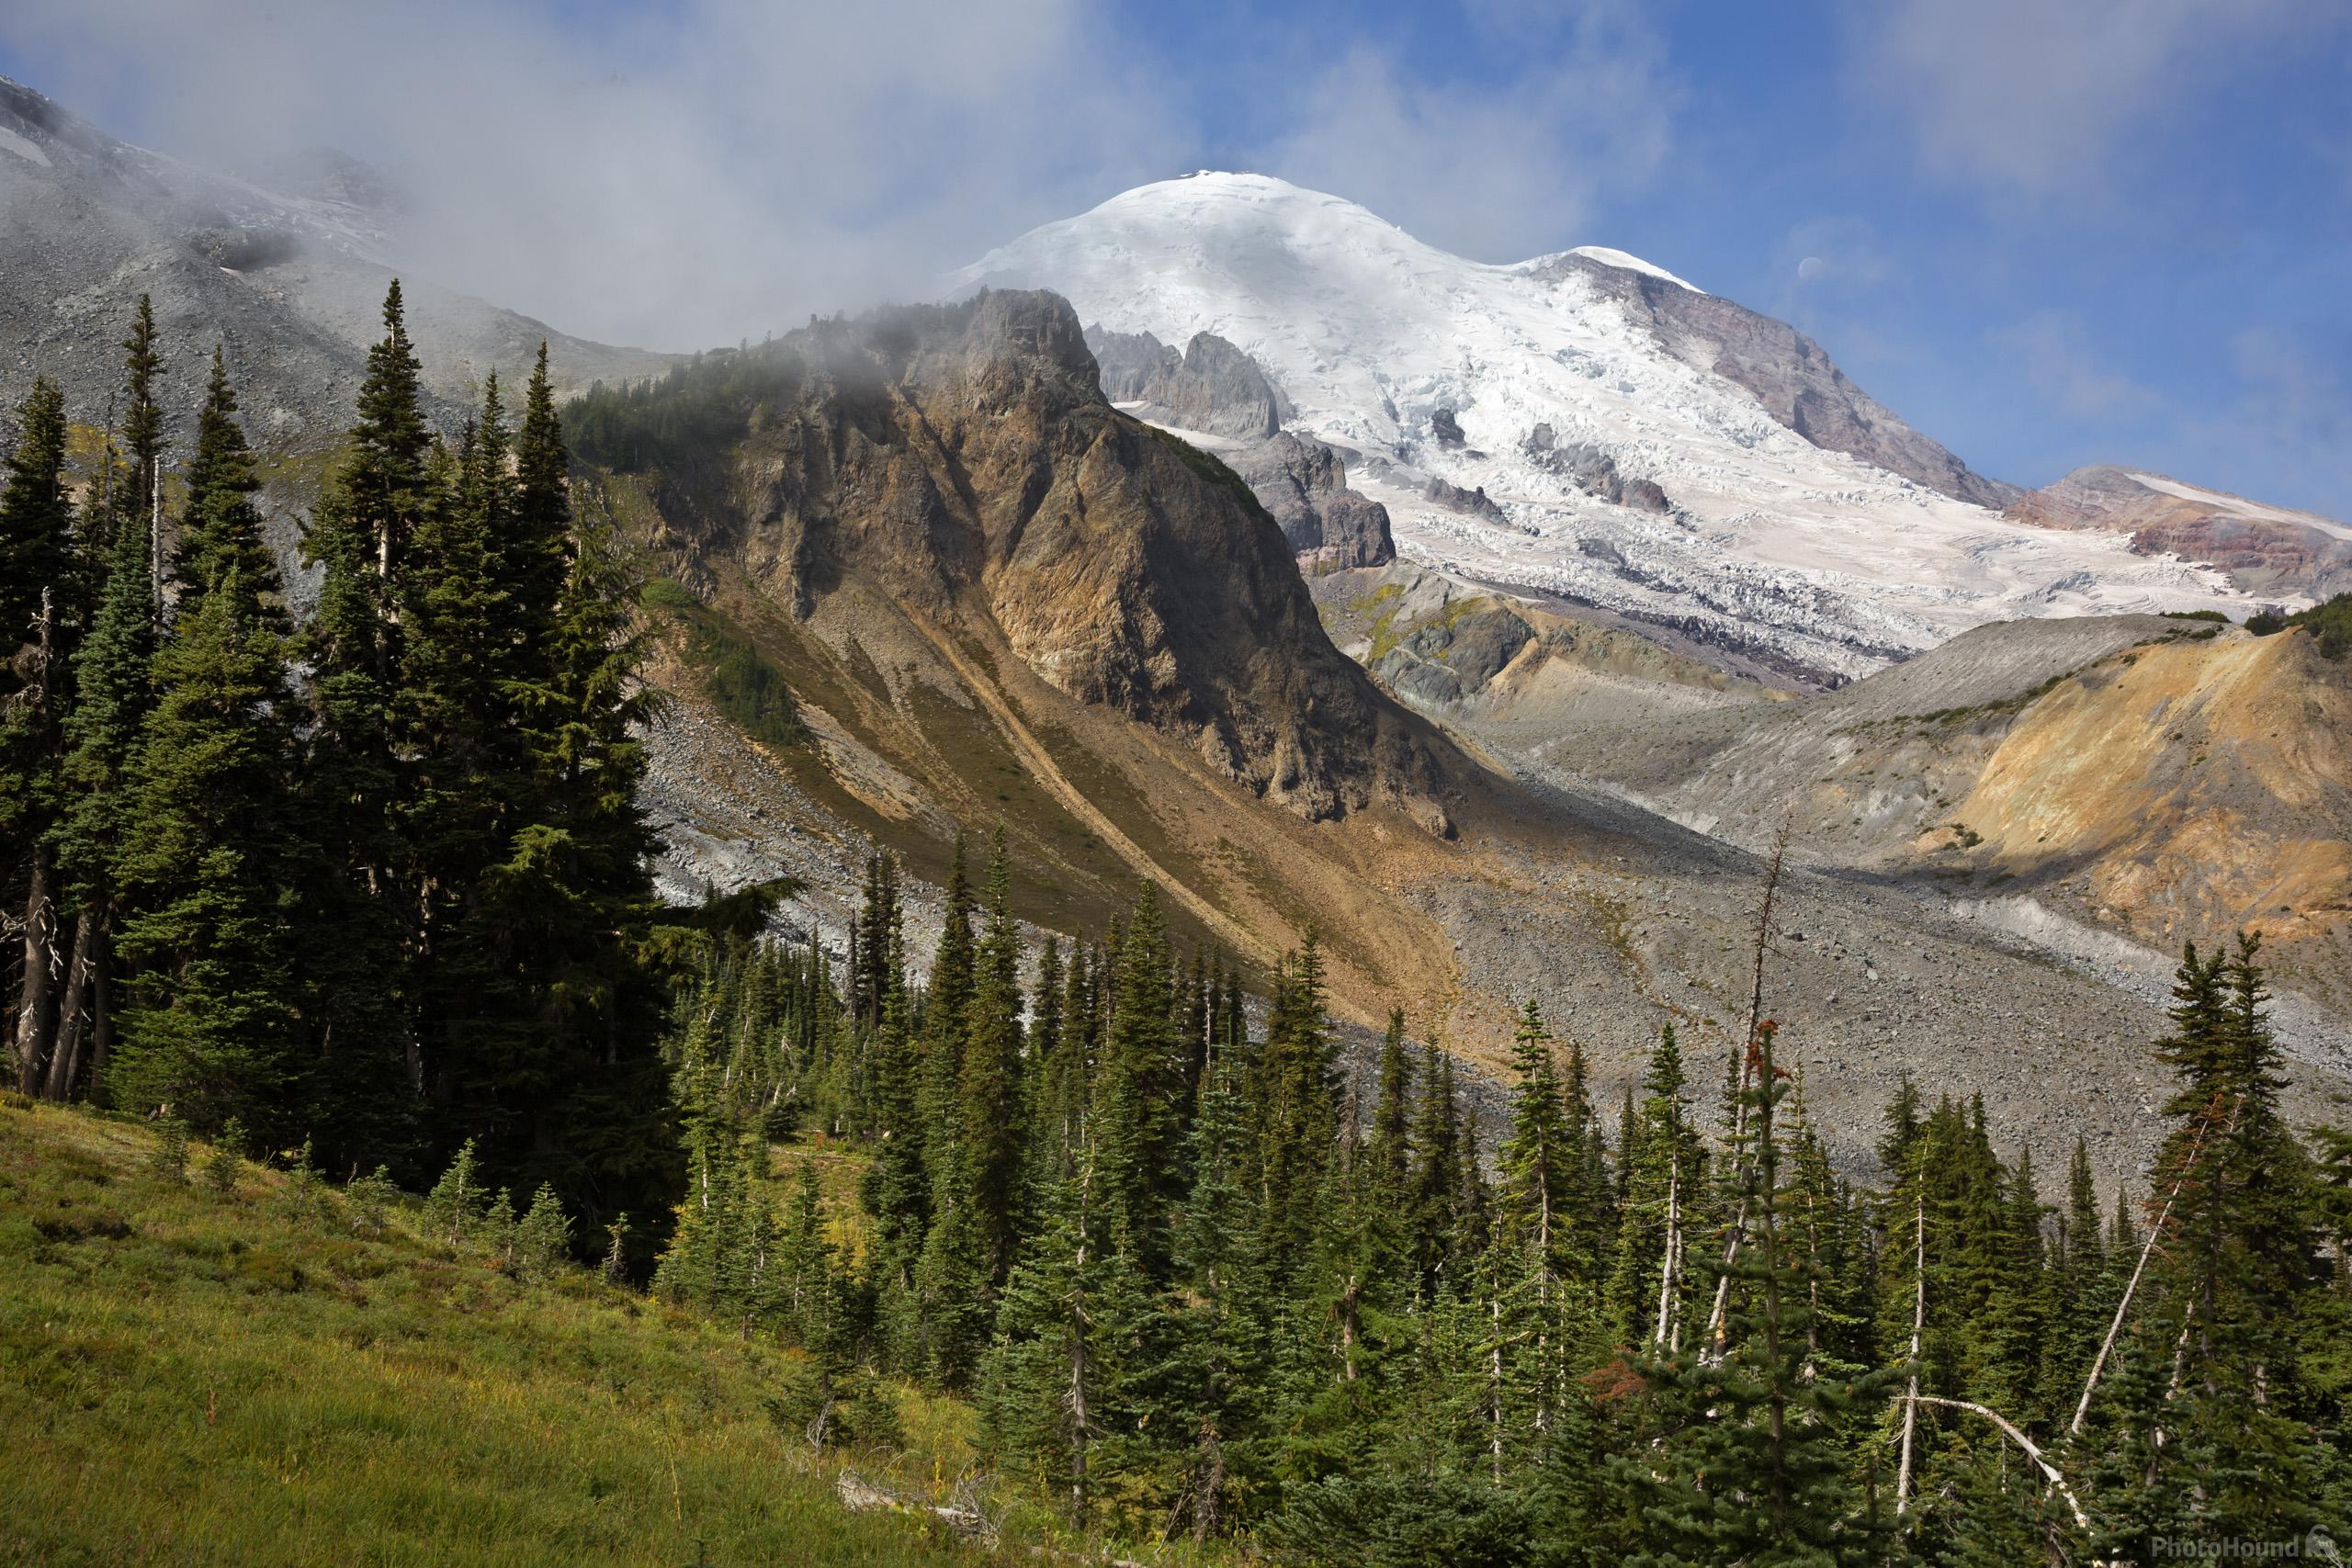 Image of Summerland, Mount Rainier National Park by T. Kirkendall and V. Spring